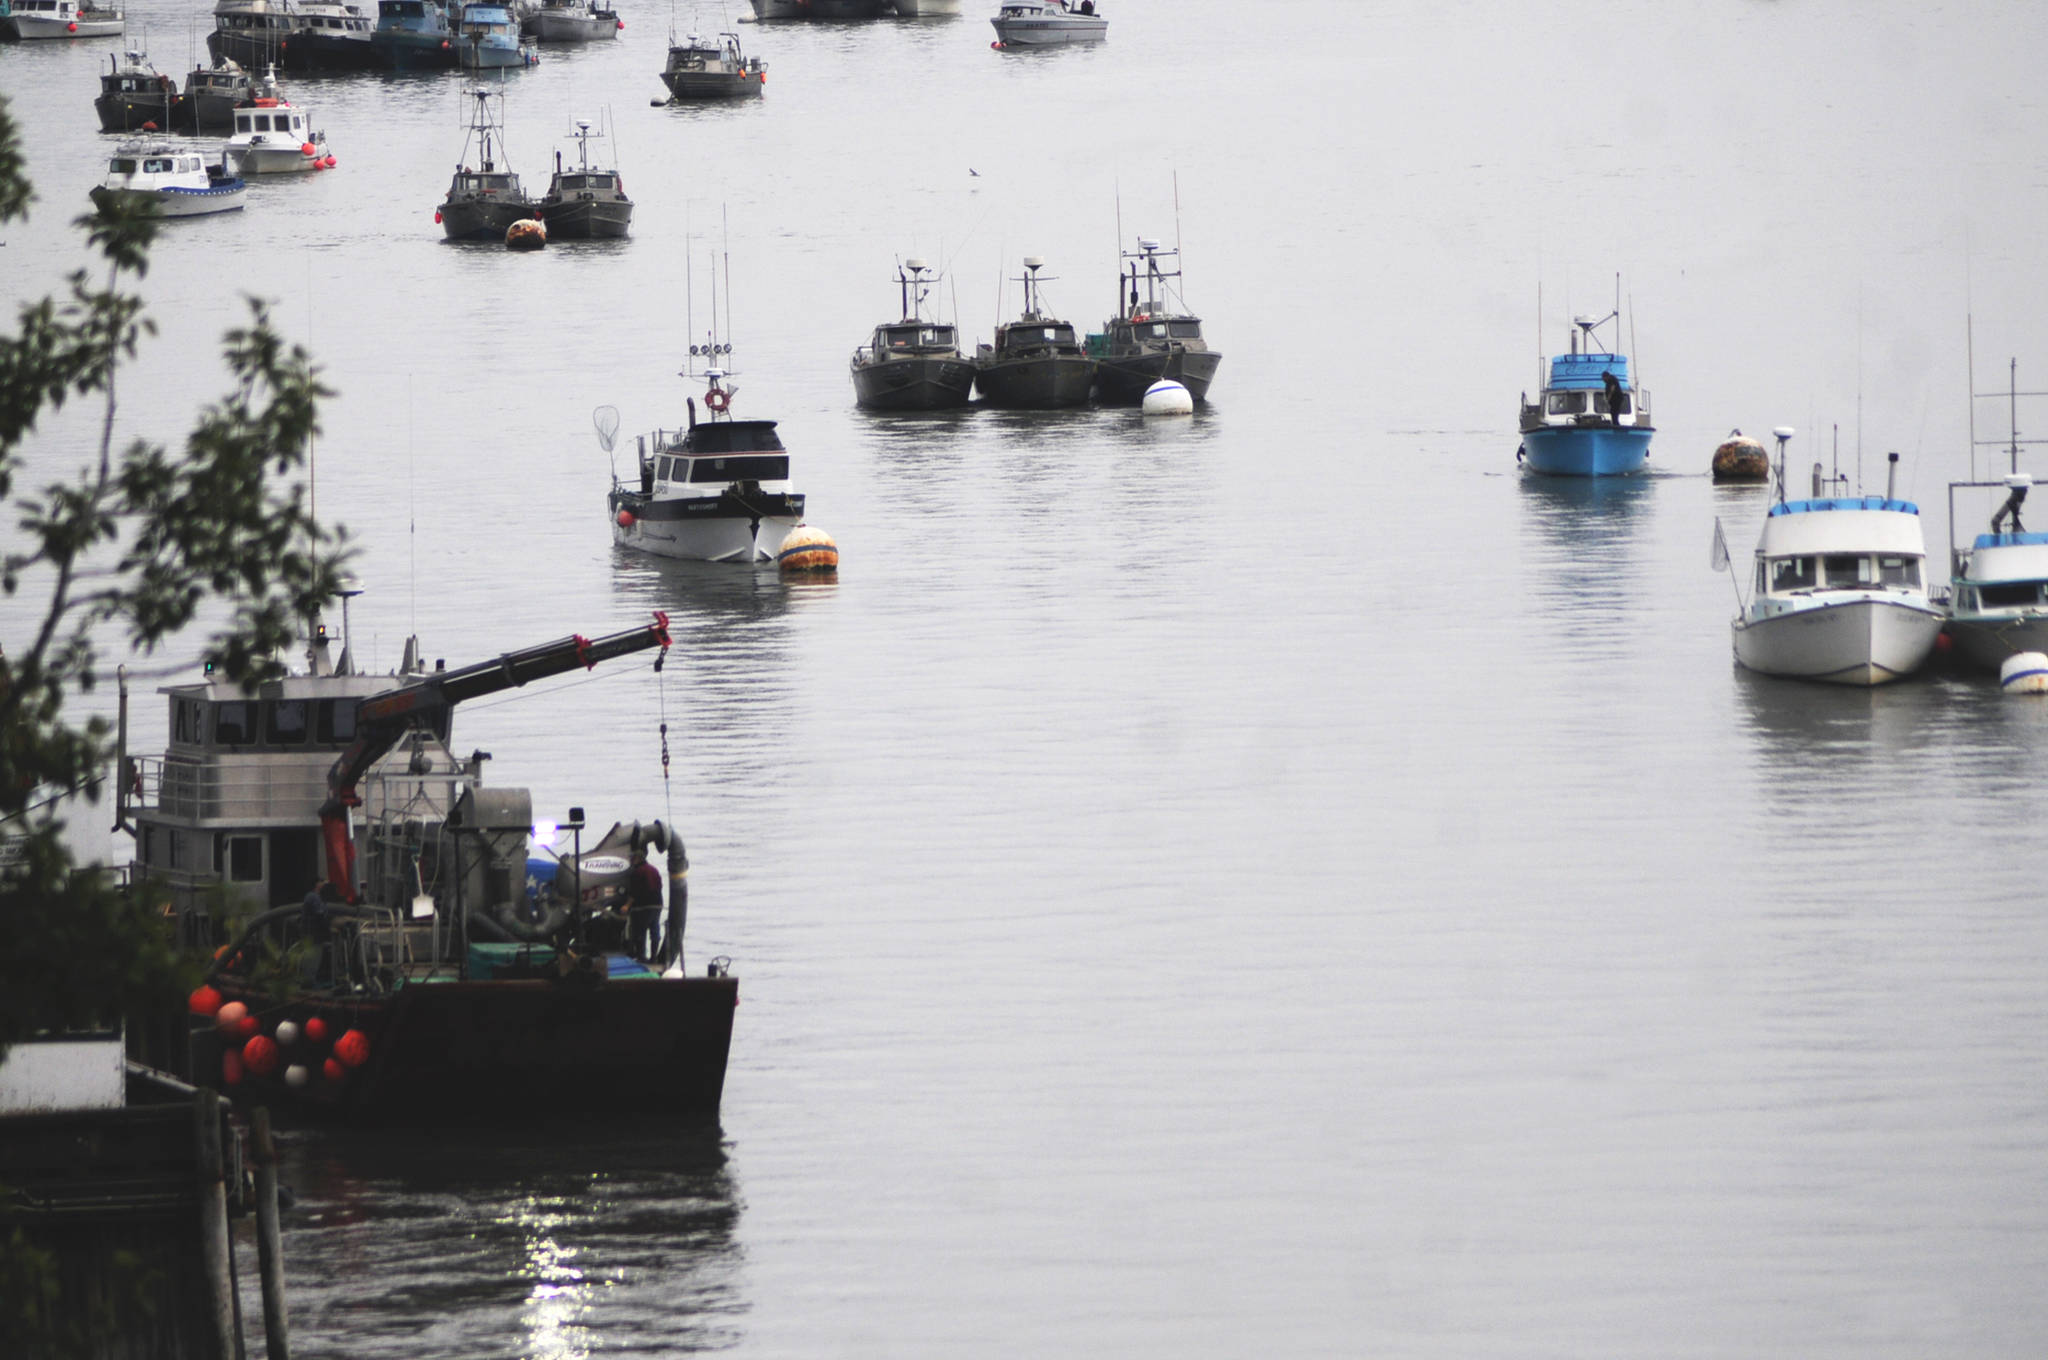 Commercial fishing vessels wait at anchor in the mouth of the Kenai River before a Saturday fishing period Friday, July 28, 2017 in Kenai, Alaska. (Photo by Elizabeth Earl/Peninsula Clarion, file) Commercial fishing vessels wait at anchor in the mouth of the Kenai River before a Saturday fishing period July 28 in Kenai. (Photo by Elizabeth Earl/Peninsula Clarion, file)